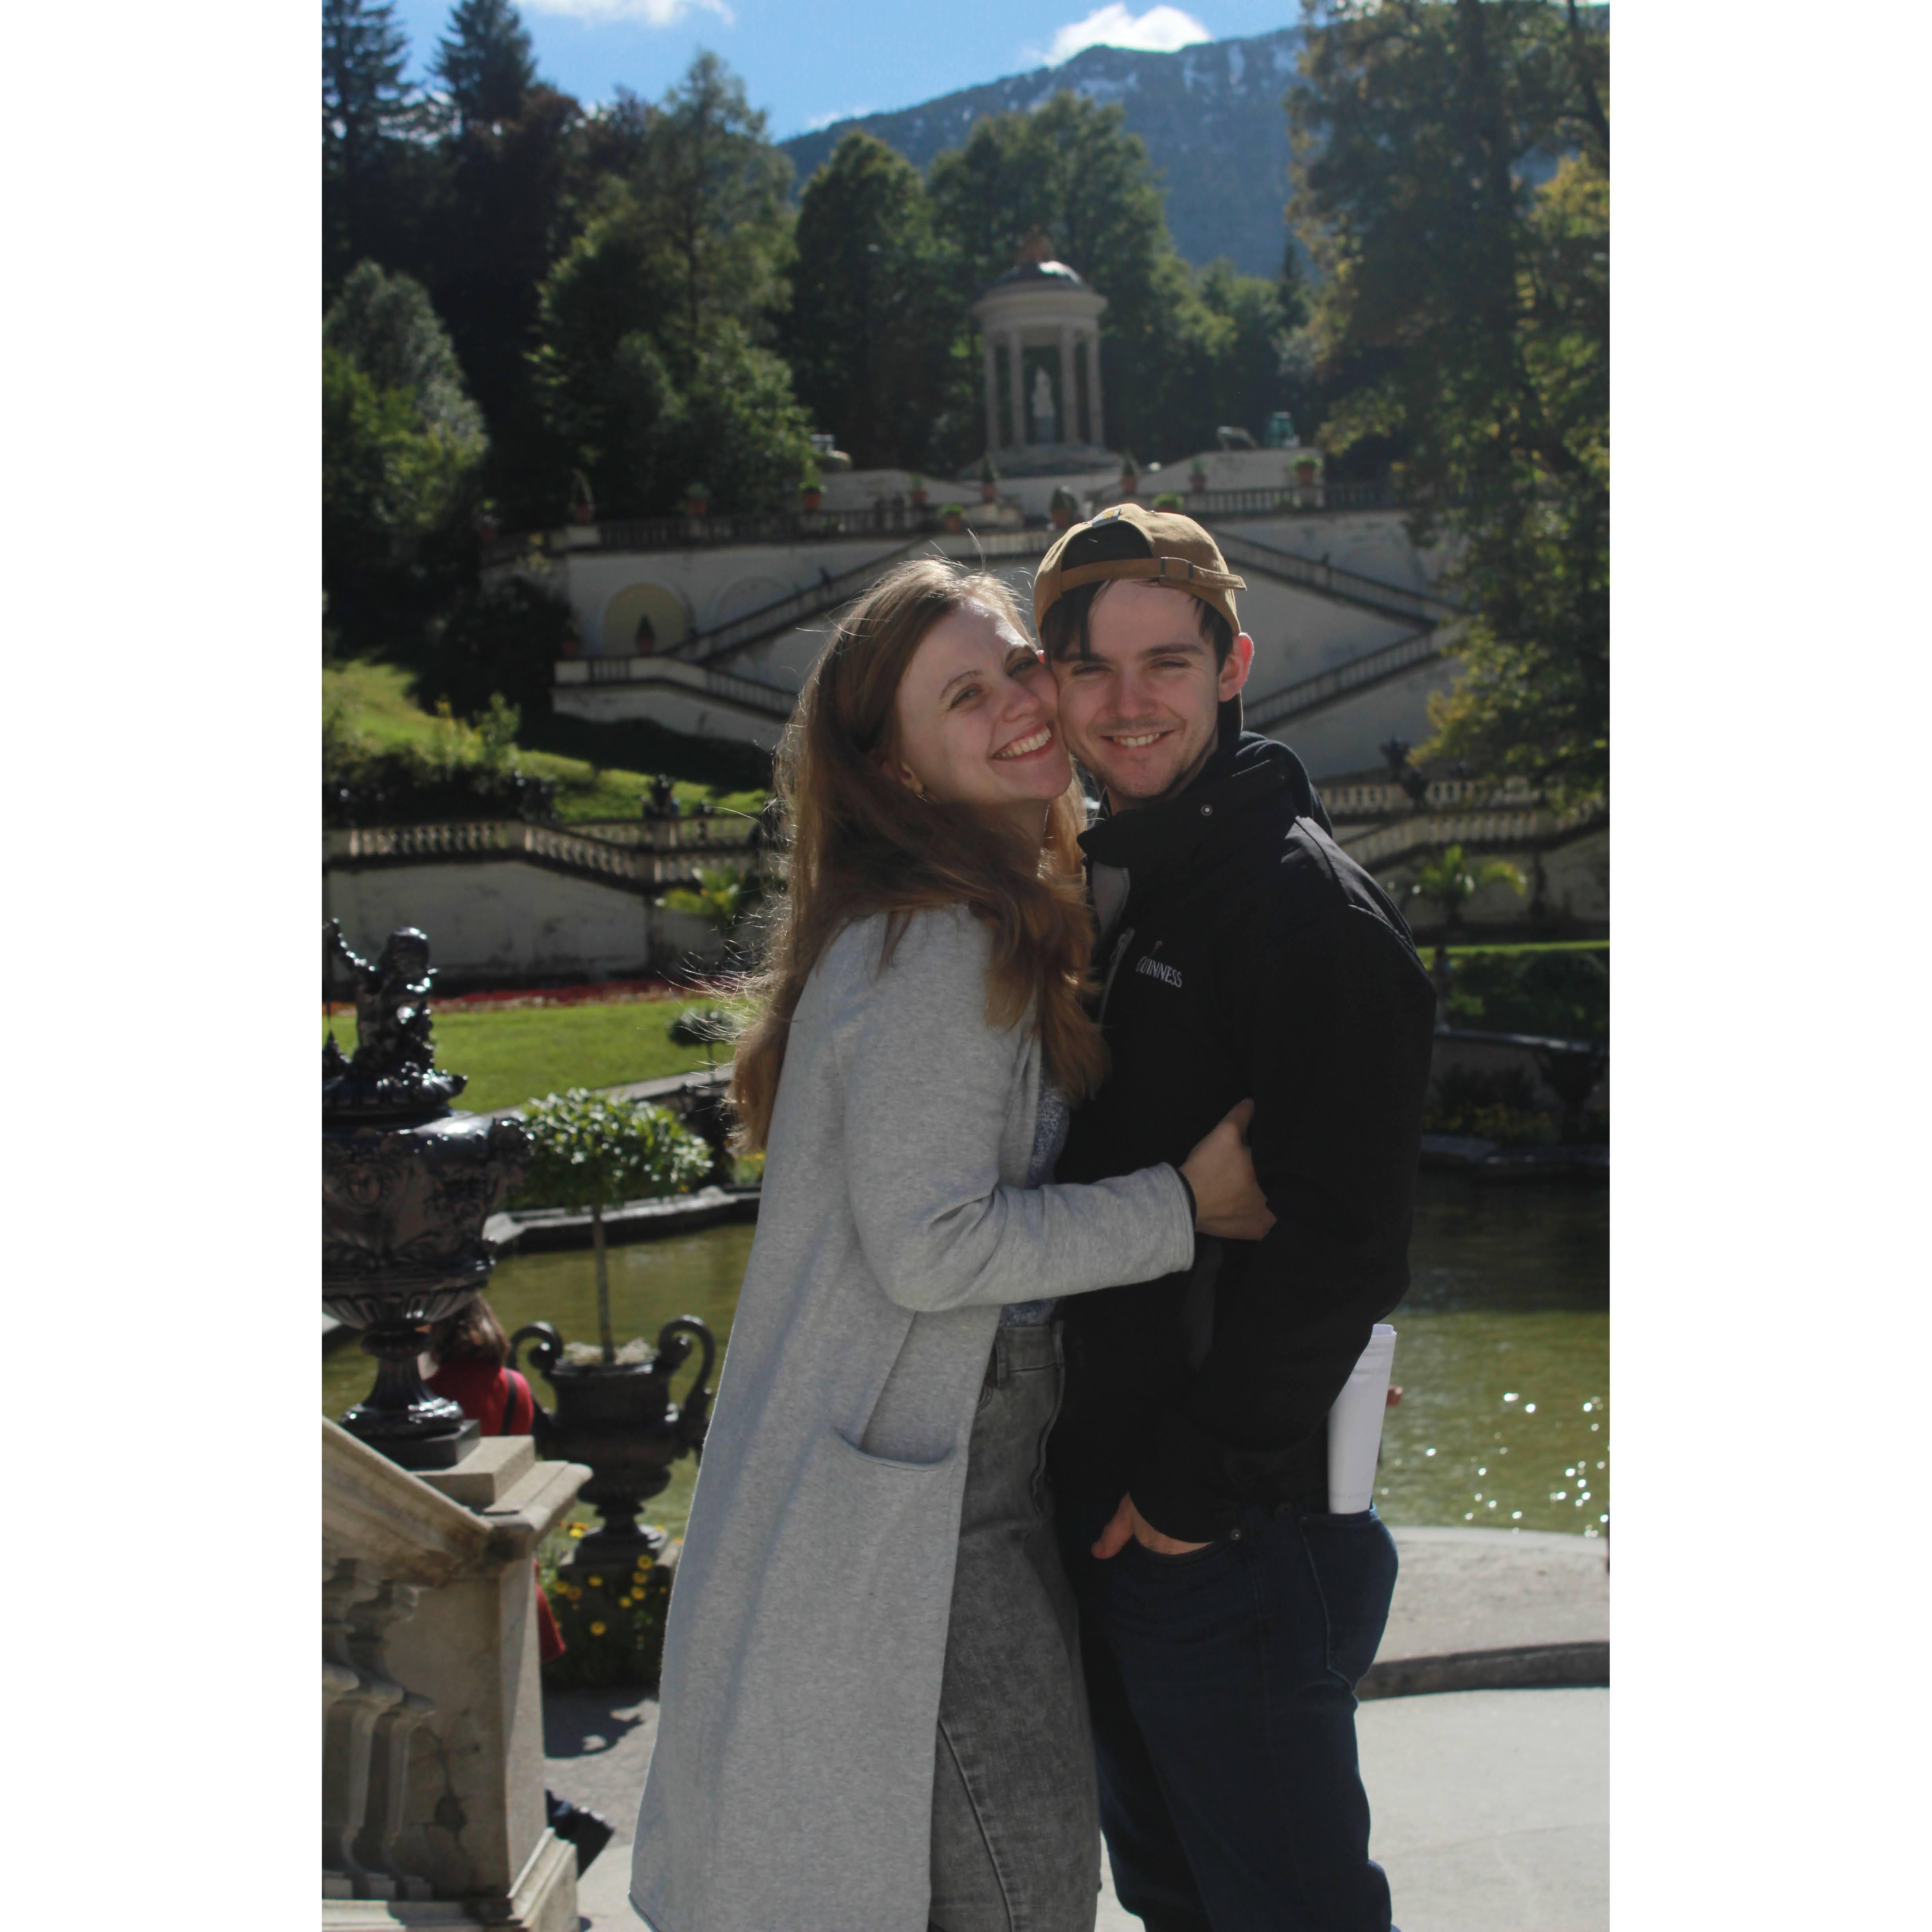 Us at the grounds of Linderhof Palace together in Bavaria